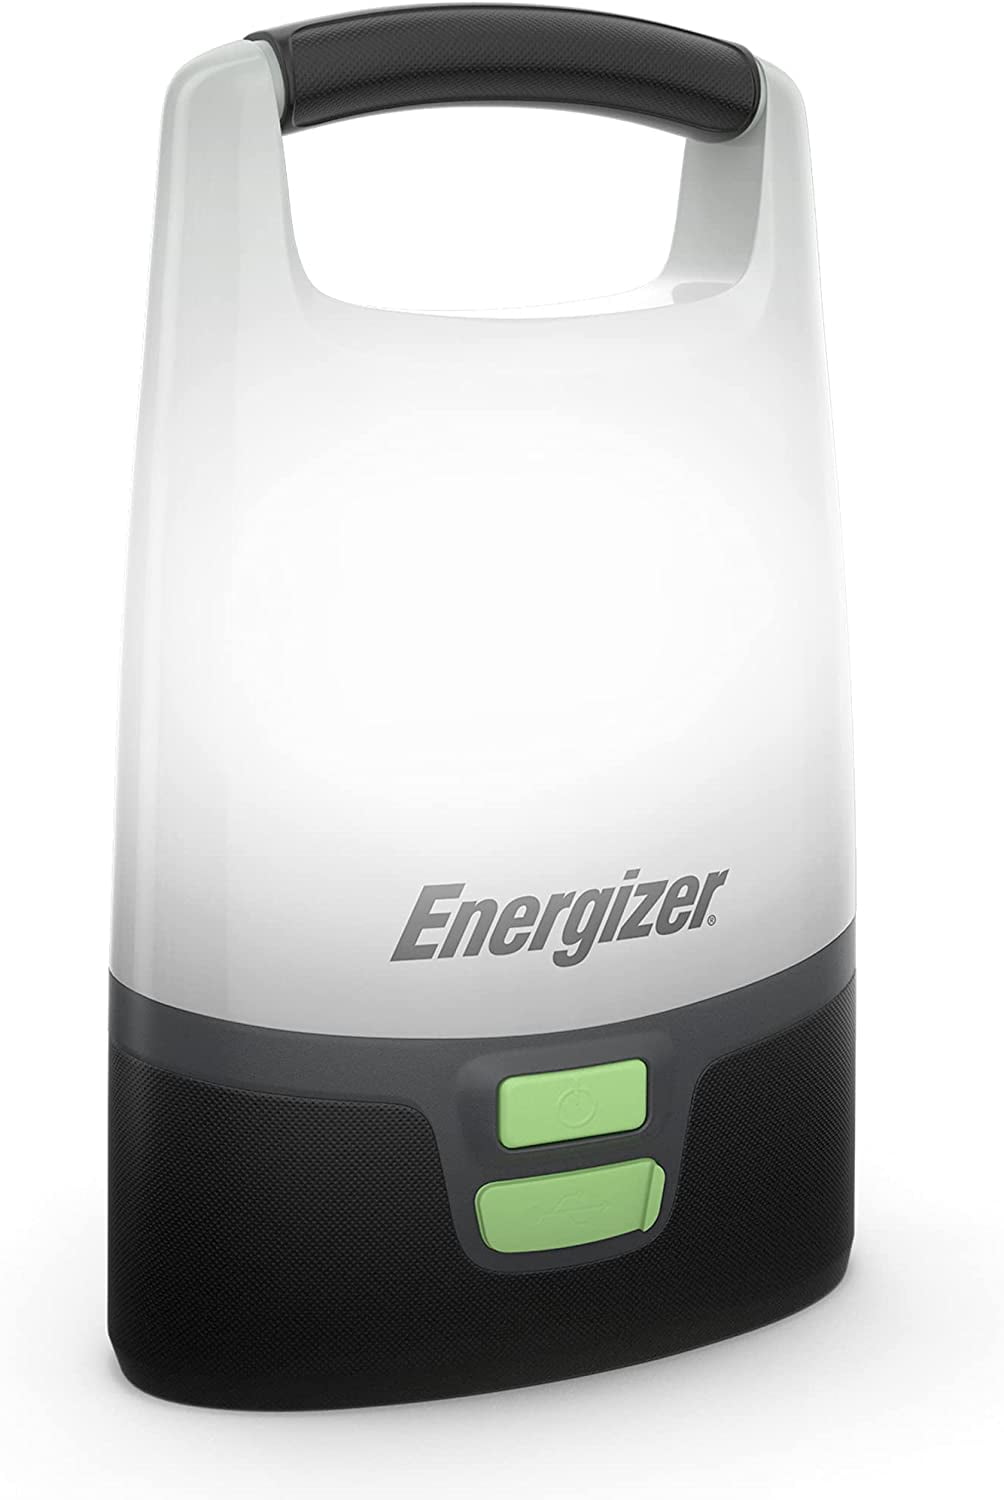 Camping USB Vision Light, Lantern, Charge LED Energizer to Versatile Lantern, or Outdoor Port Devices Emergency Light